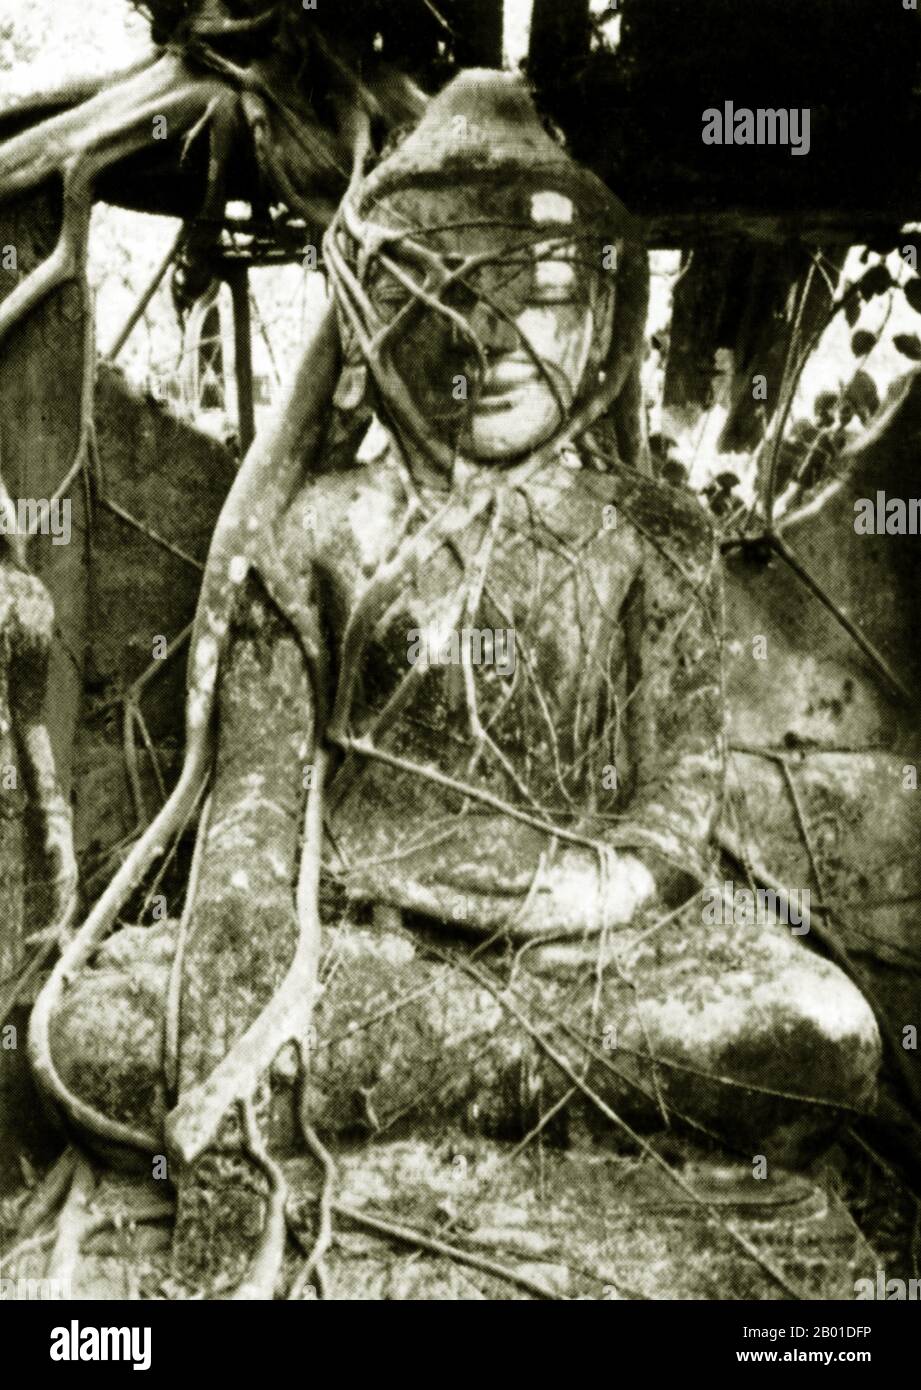 Burma: An image of the Buddha entwined with vines, Thaton, Burma, c. 1892-1896.  Legend attributes the first Buddhist doctrine in Burma to 228 BCE when Sonna and Uttara, two ambassadors of the Emperor Ashoka the Great of India, came to the country with sacred texts. However, the golden era of Buddhism truly began in the 11th century after King Anawrahta of Pagan (Bagan) was converted to Theravada Buddhism. Today, 89% of the population of Burma is Theravada Buddhist. Stock Photo